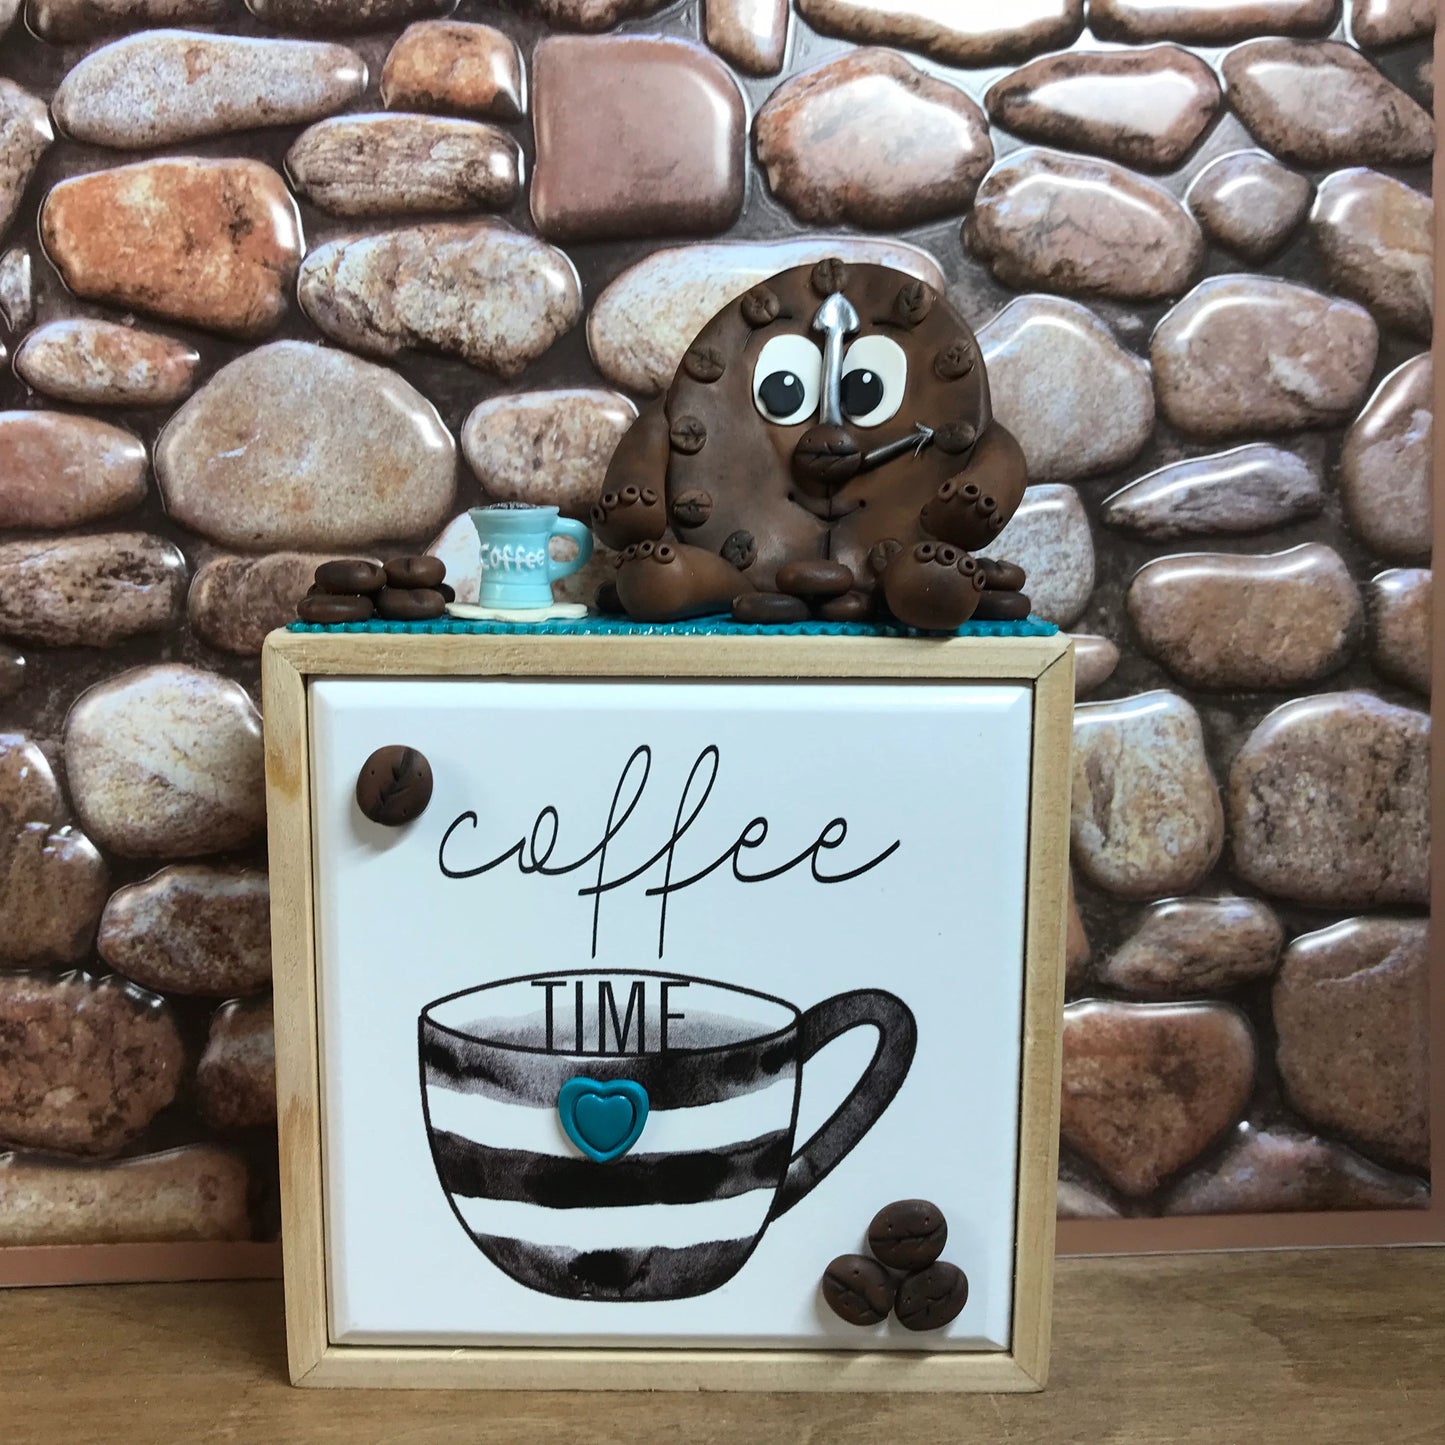 Coffee Time! Clay Coffee Bean with Clock Face Shows It’s Always Coffee Time - Coffee Humor, Coffee Bar, Coffee Nook Decor, Funny Collectible